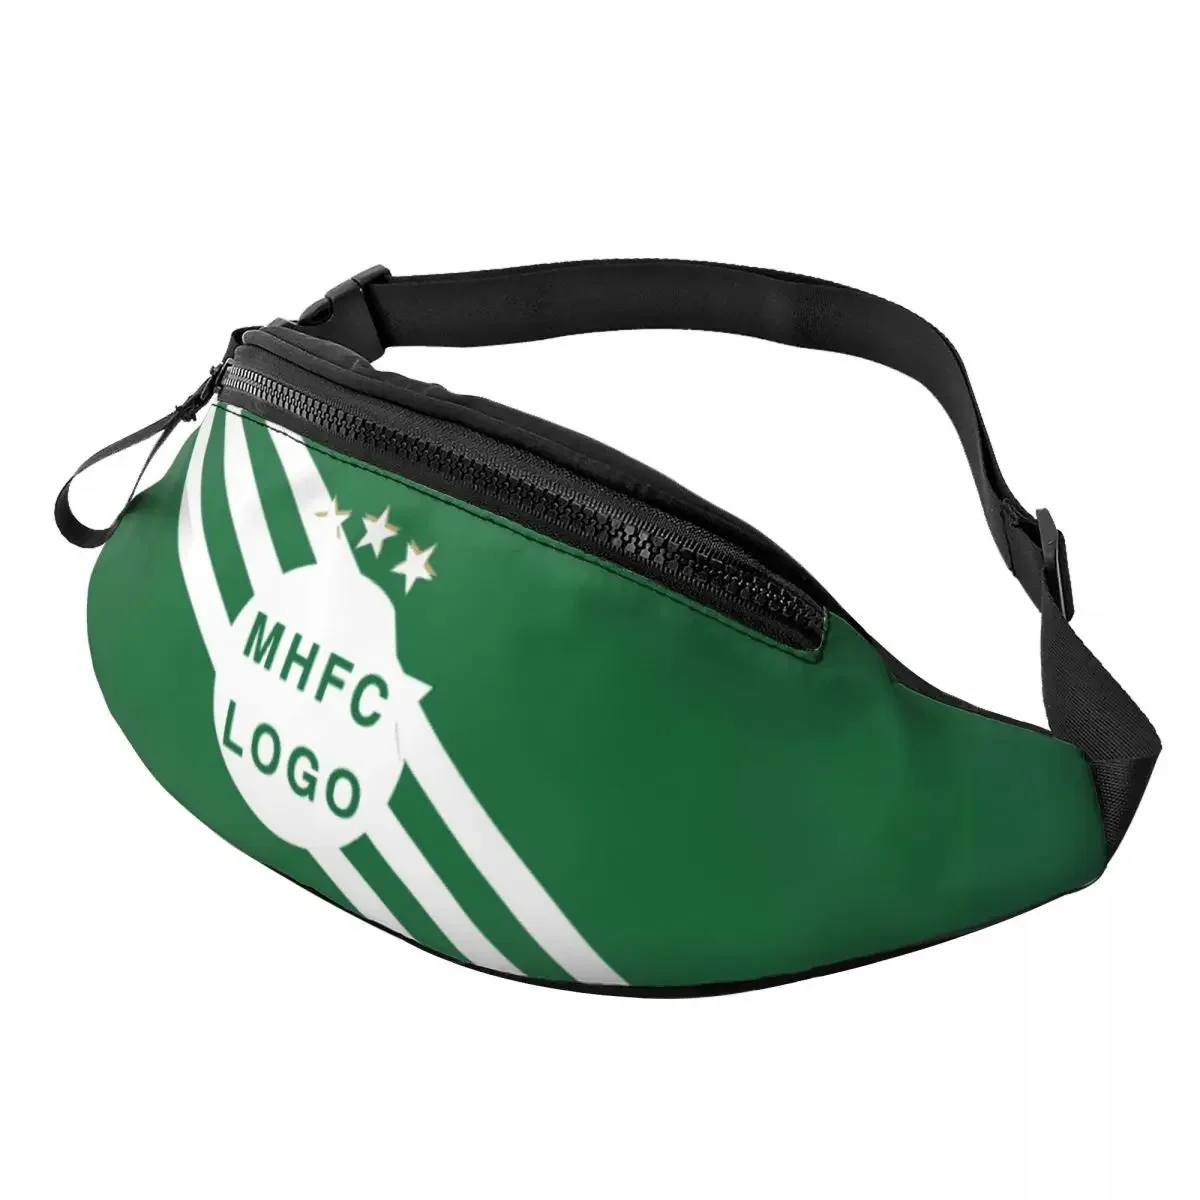 

Israel F.C MHFC Crossbody Fanny Pack Enjoy Sports Festival Workout Traveling Running Casual Wallets Waist Pack Phone Bag